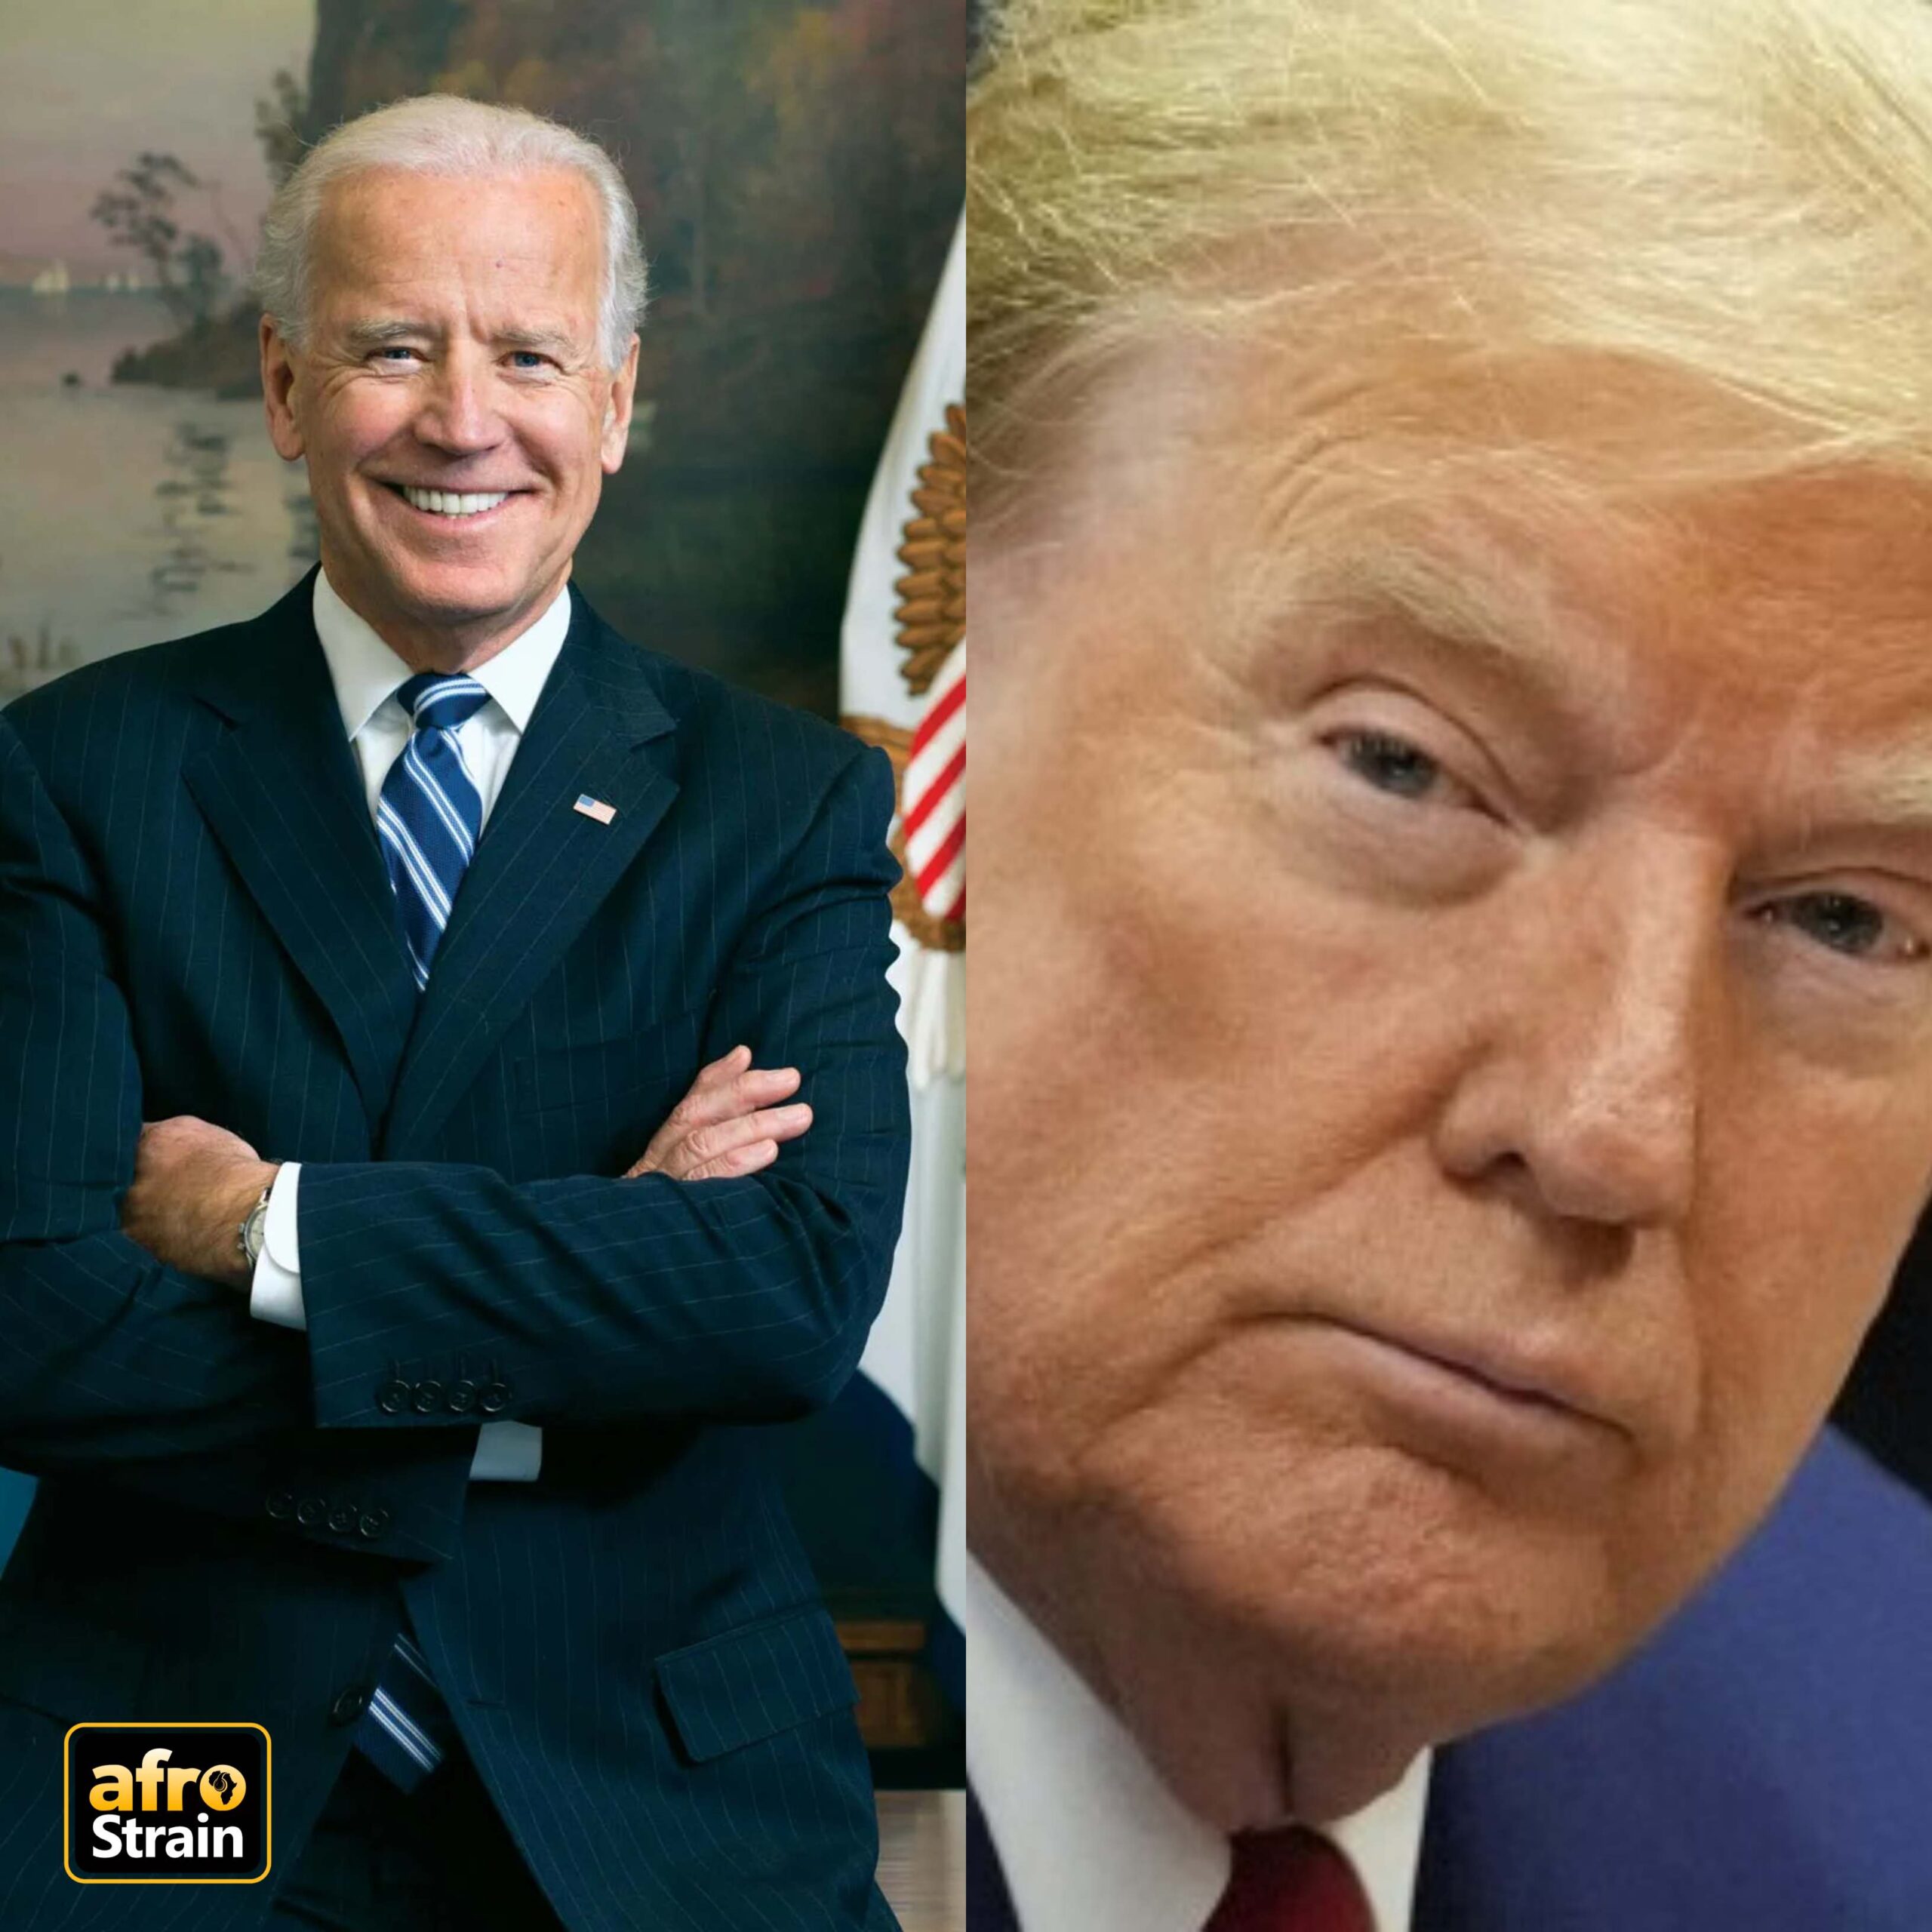 Trump Asks Biden For Apology After Declaring Easter Sunday as Trans Day of Visibility